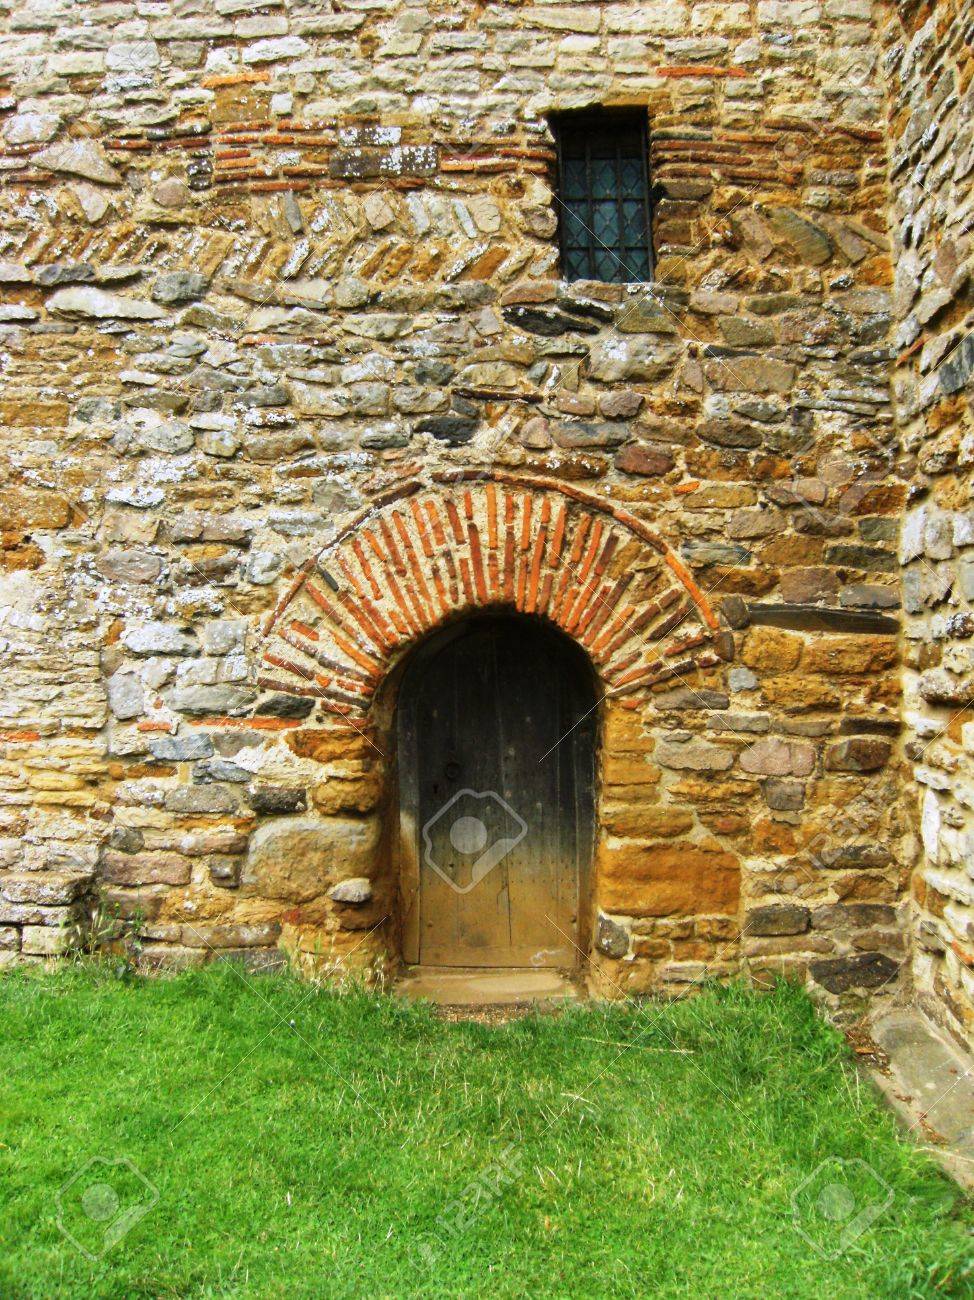 Arched Fireplace Door Lovely Ancient Sandstone Wall with Arched Door